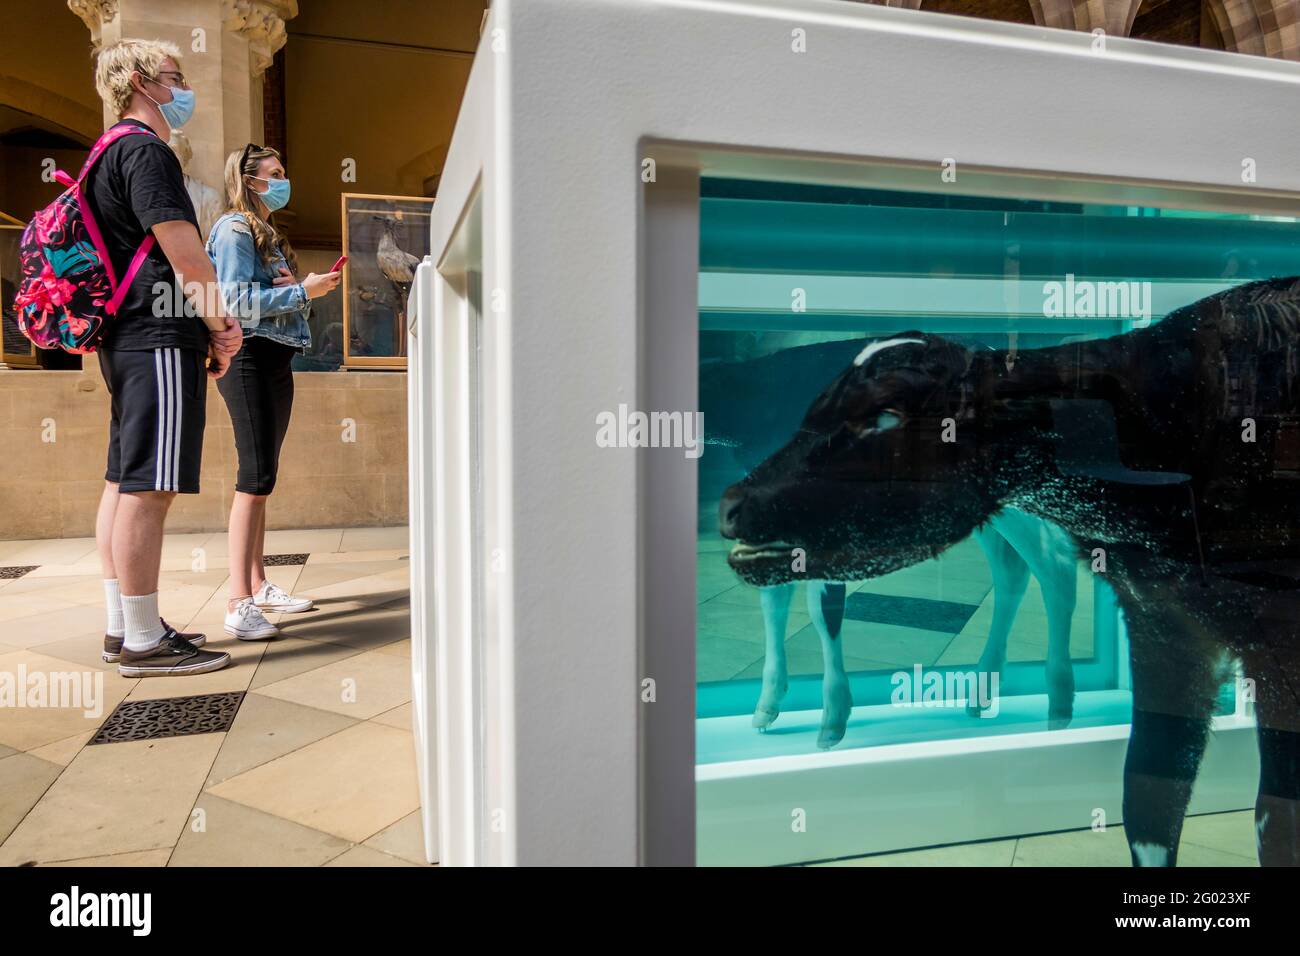 Oxford, UK. 30th May, 2021. Calves in formaldehyde by Damien Hirst promote  an exhibition on meat consumption in front of skeletons of living animals -  People of all ages enjoy a Bank